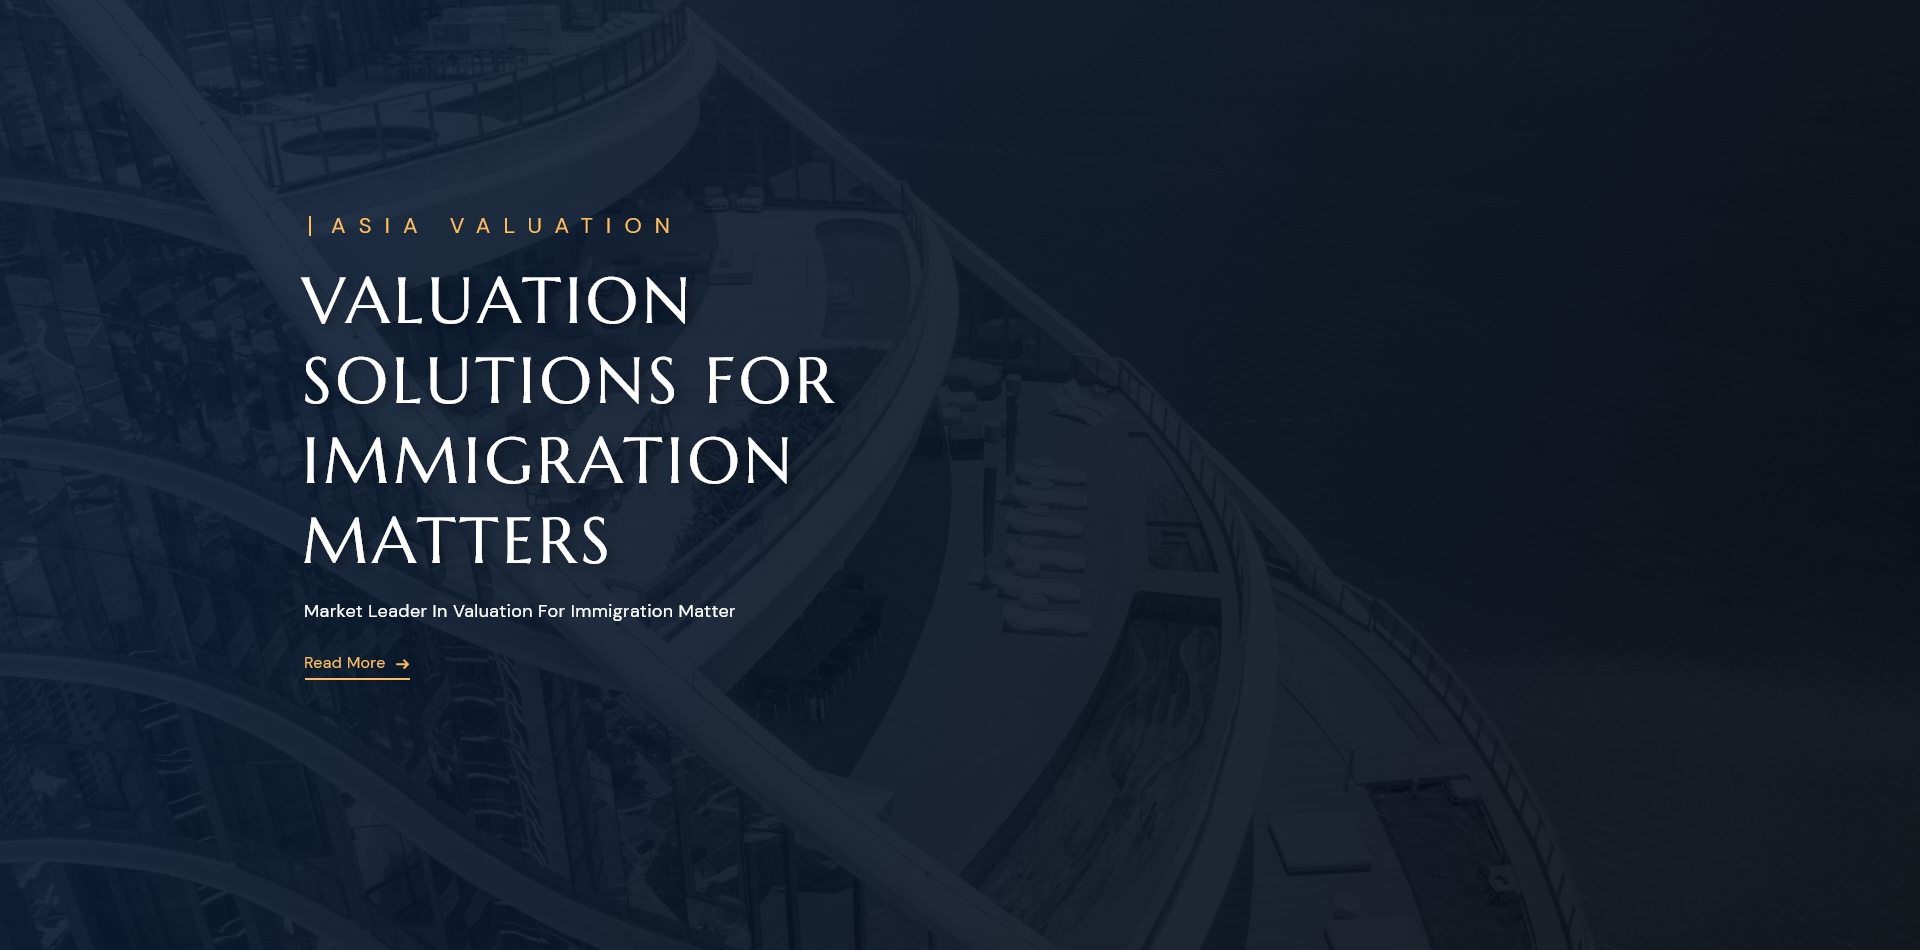 Valuation-Solutions-For-Immigration-Matters-1